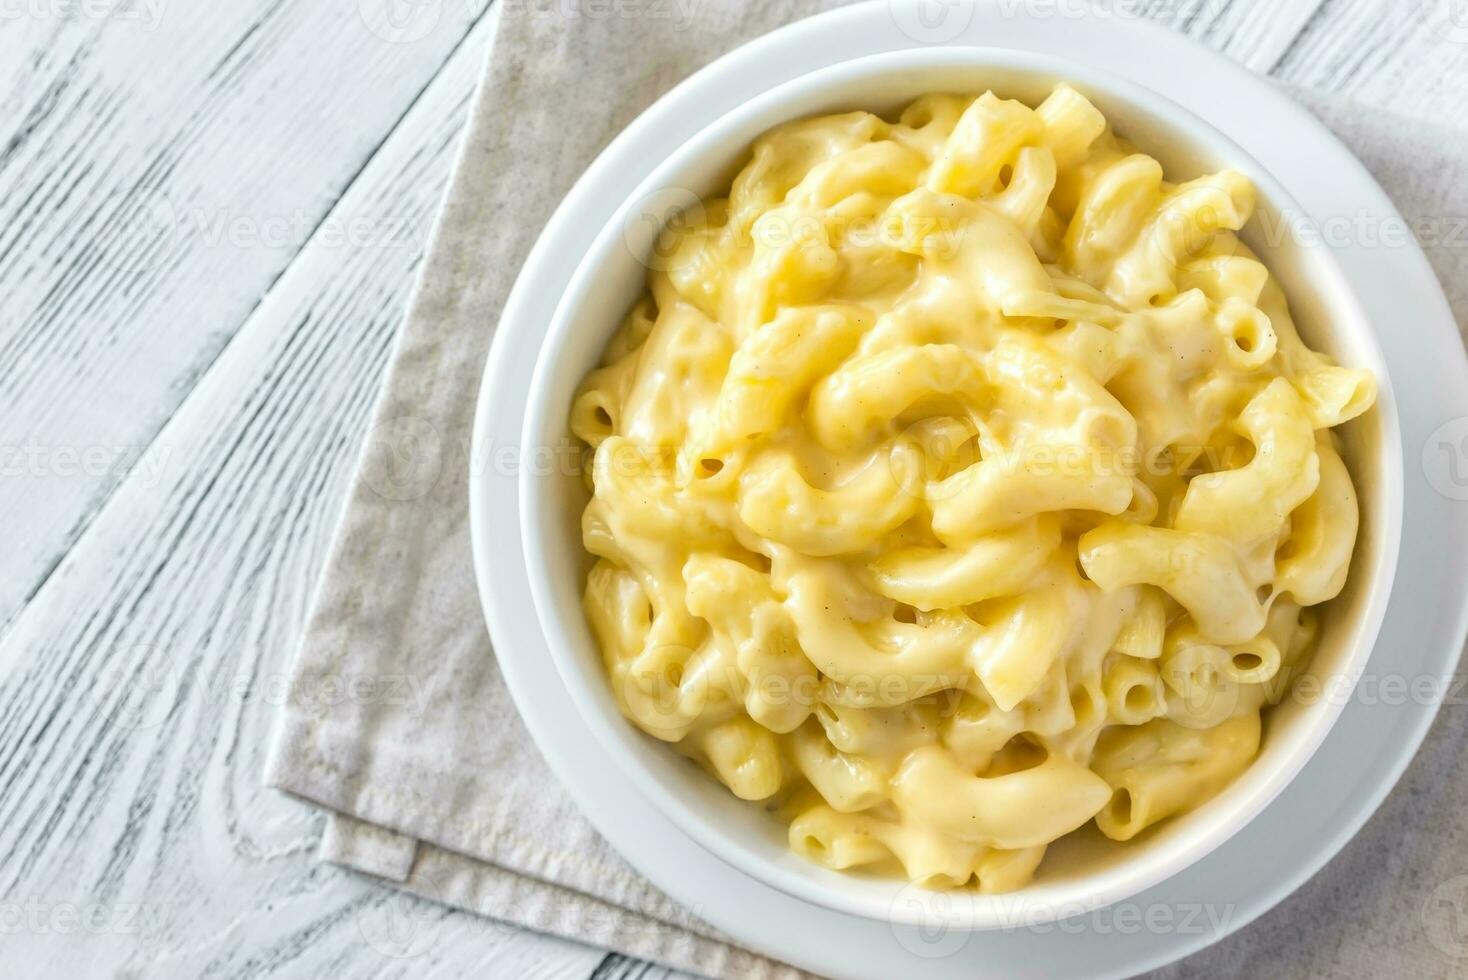 Portion of macaroni and cheese photo